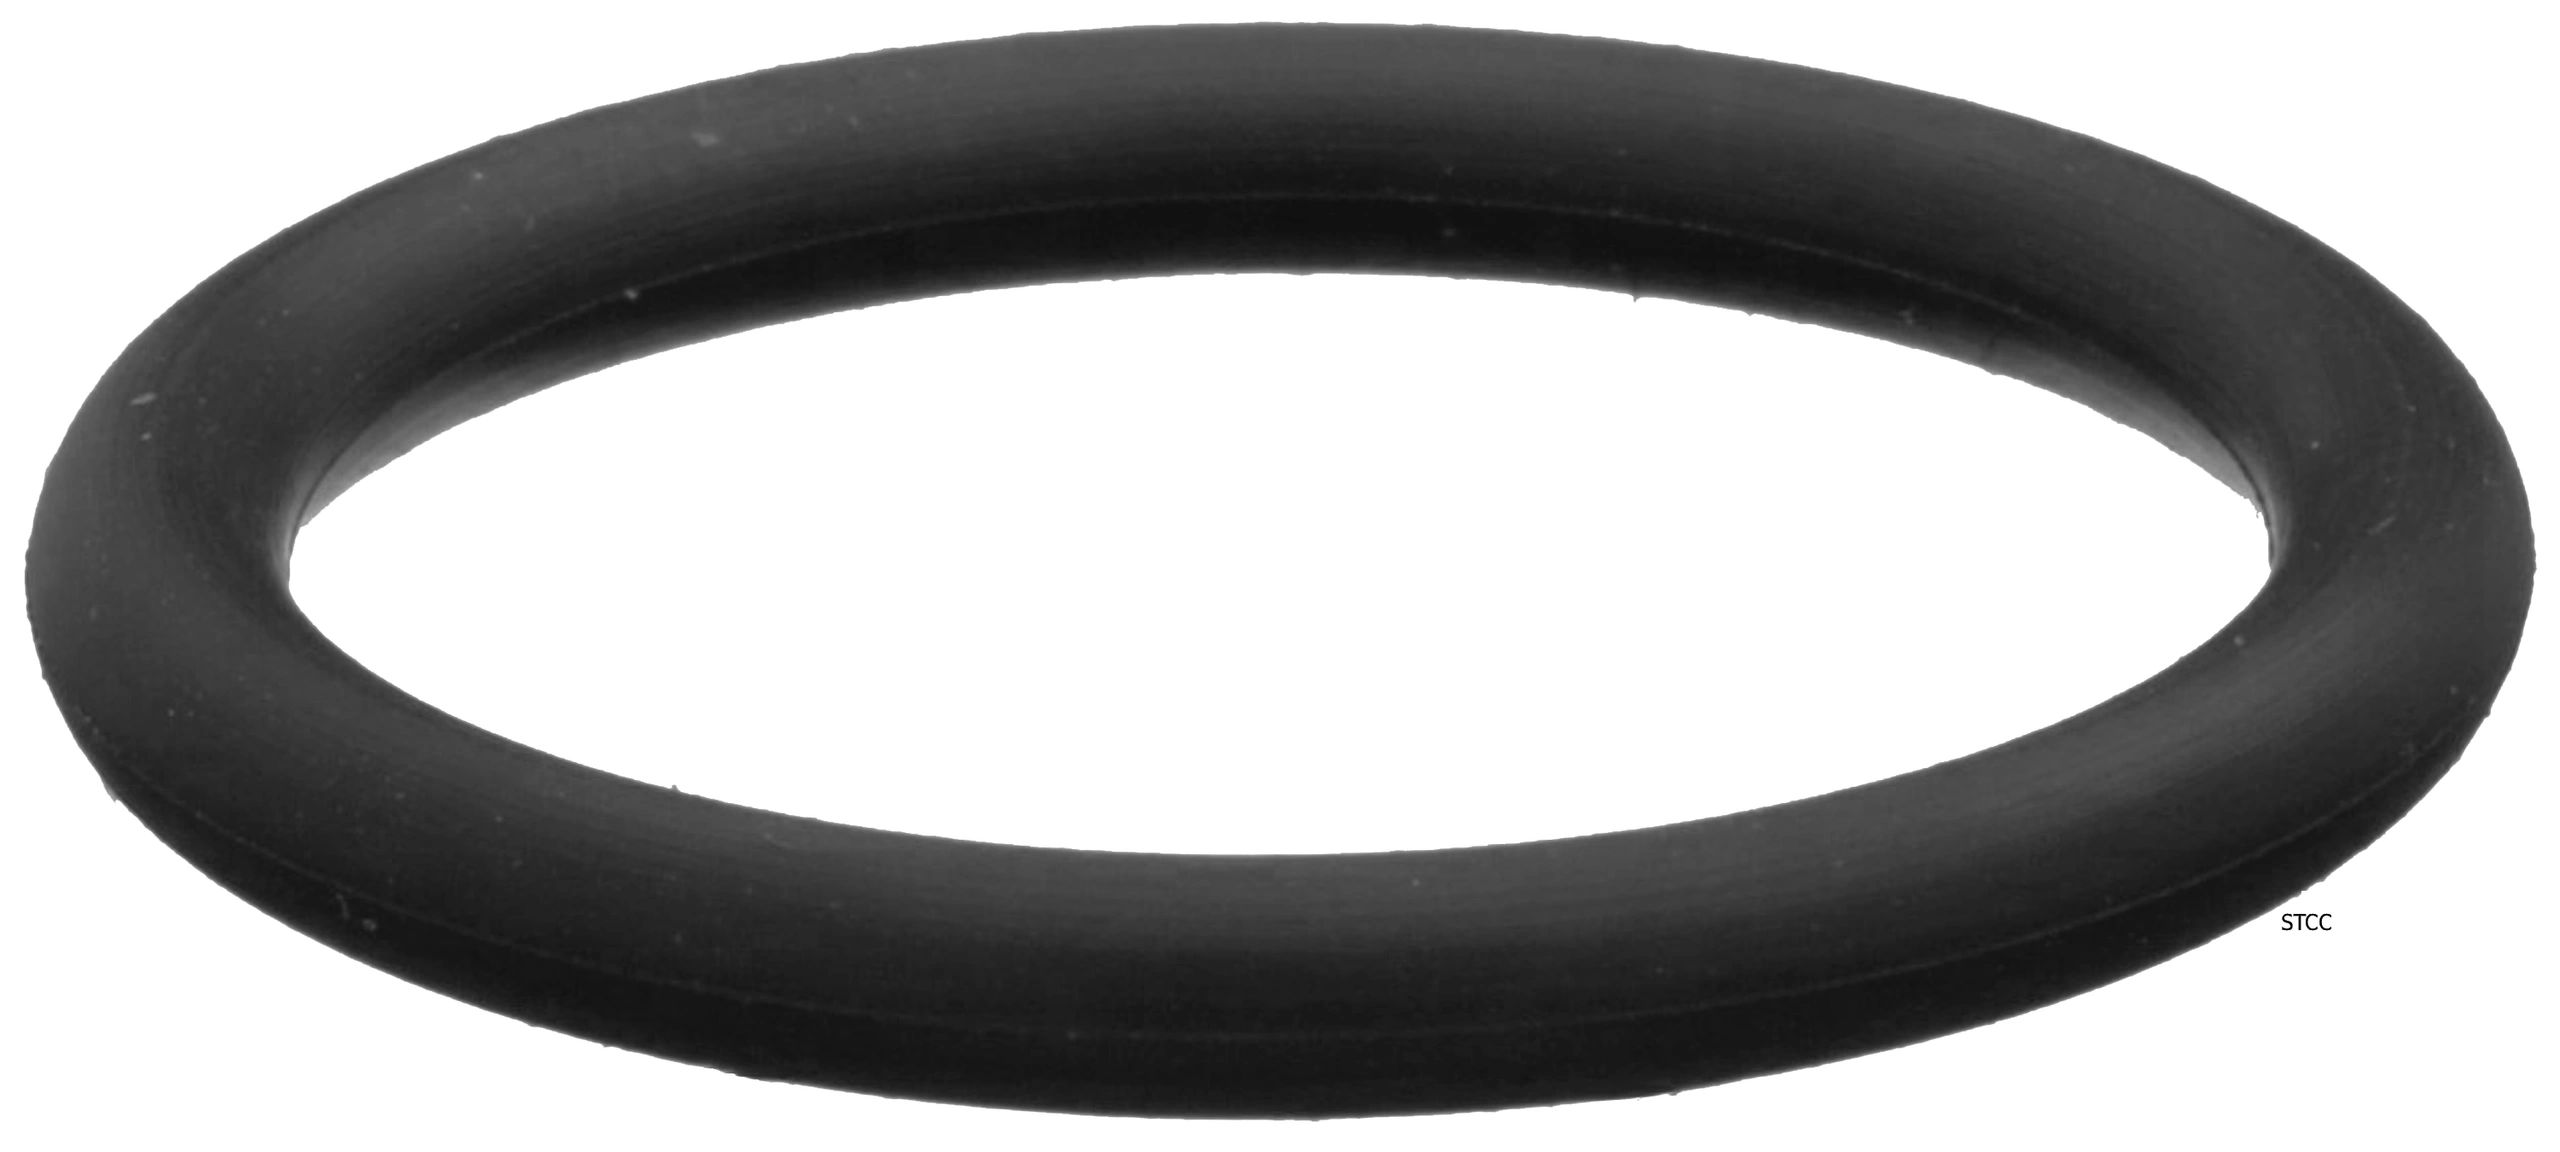 Neoprene Rubber 8 Pipe Size Pack of 50 8.62 ID Pressure Class 300# Sterling Seal CRG7106.800.062.300X50 7106 60 Durometer Ring Gasket 1/16 Thick 